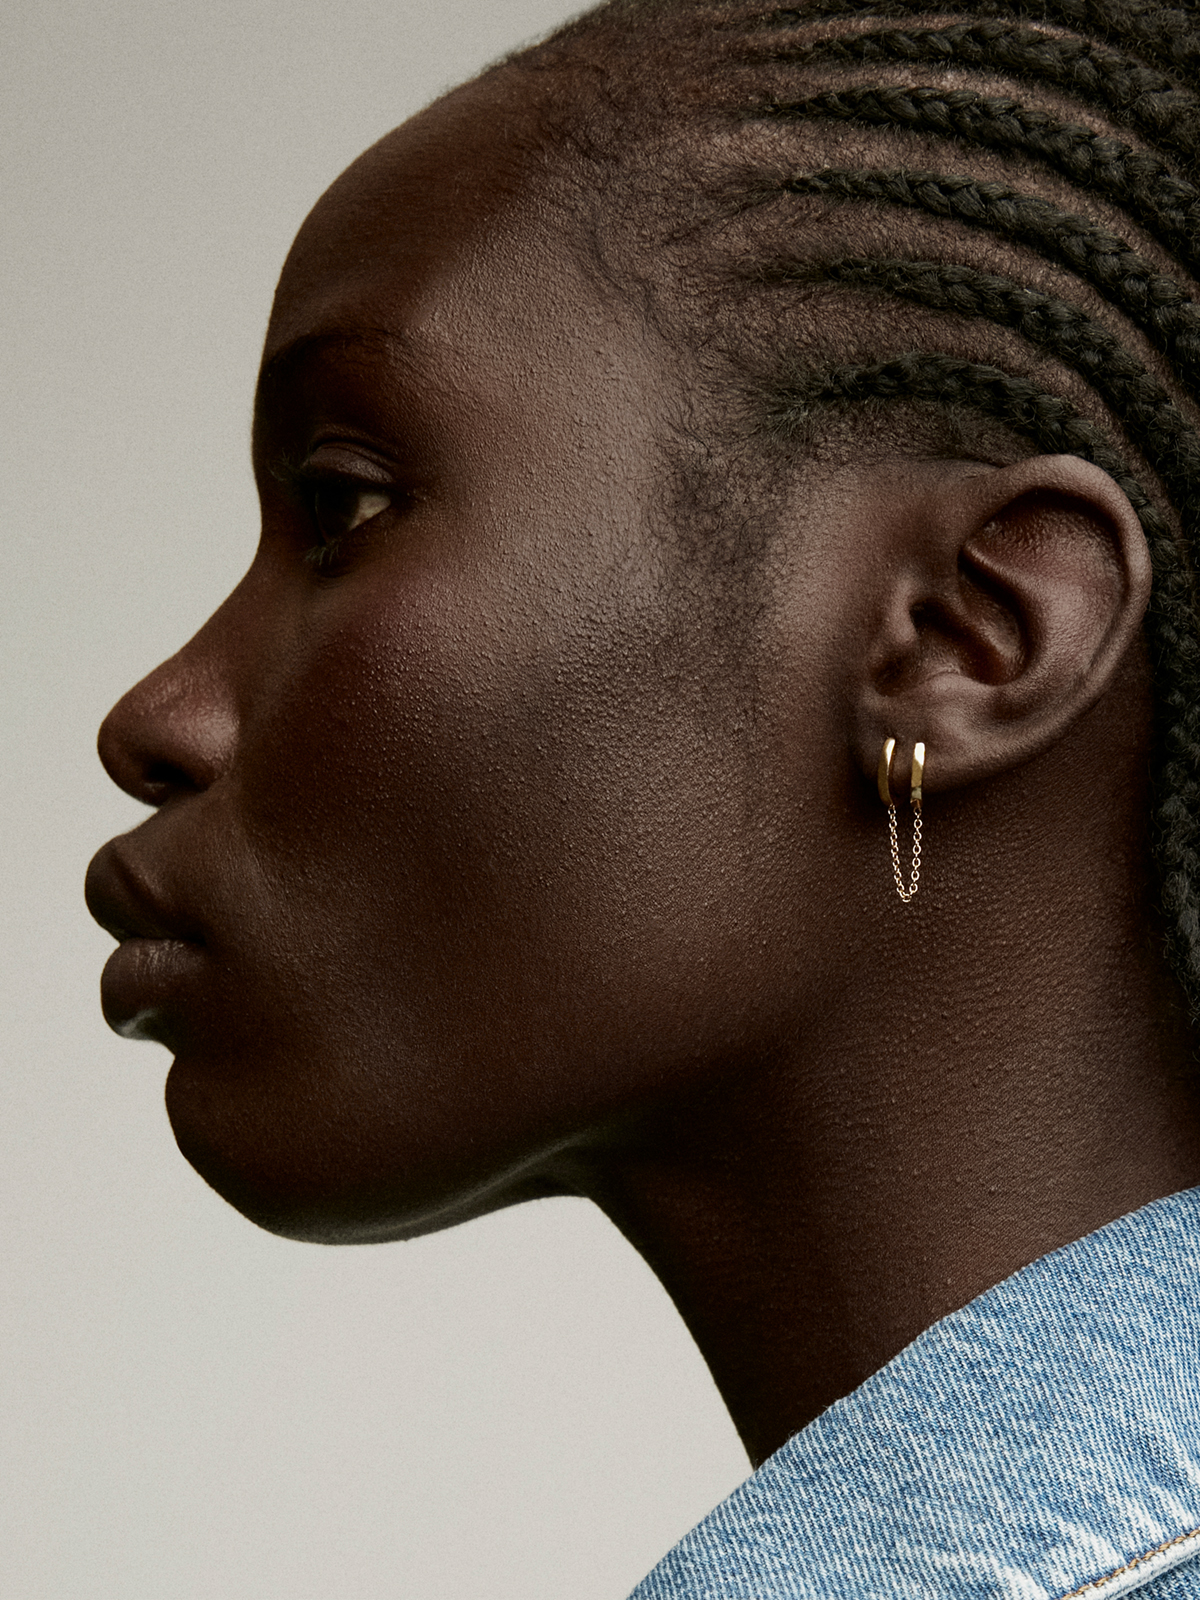 Individual climbing earring made from 925 silver, bathed in 18K yellow gold with a double hoop.